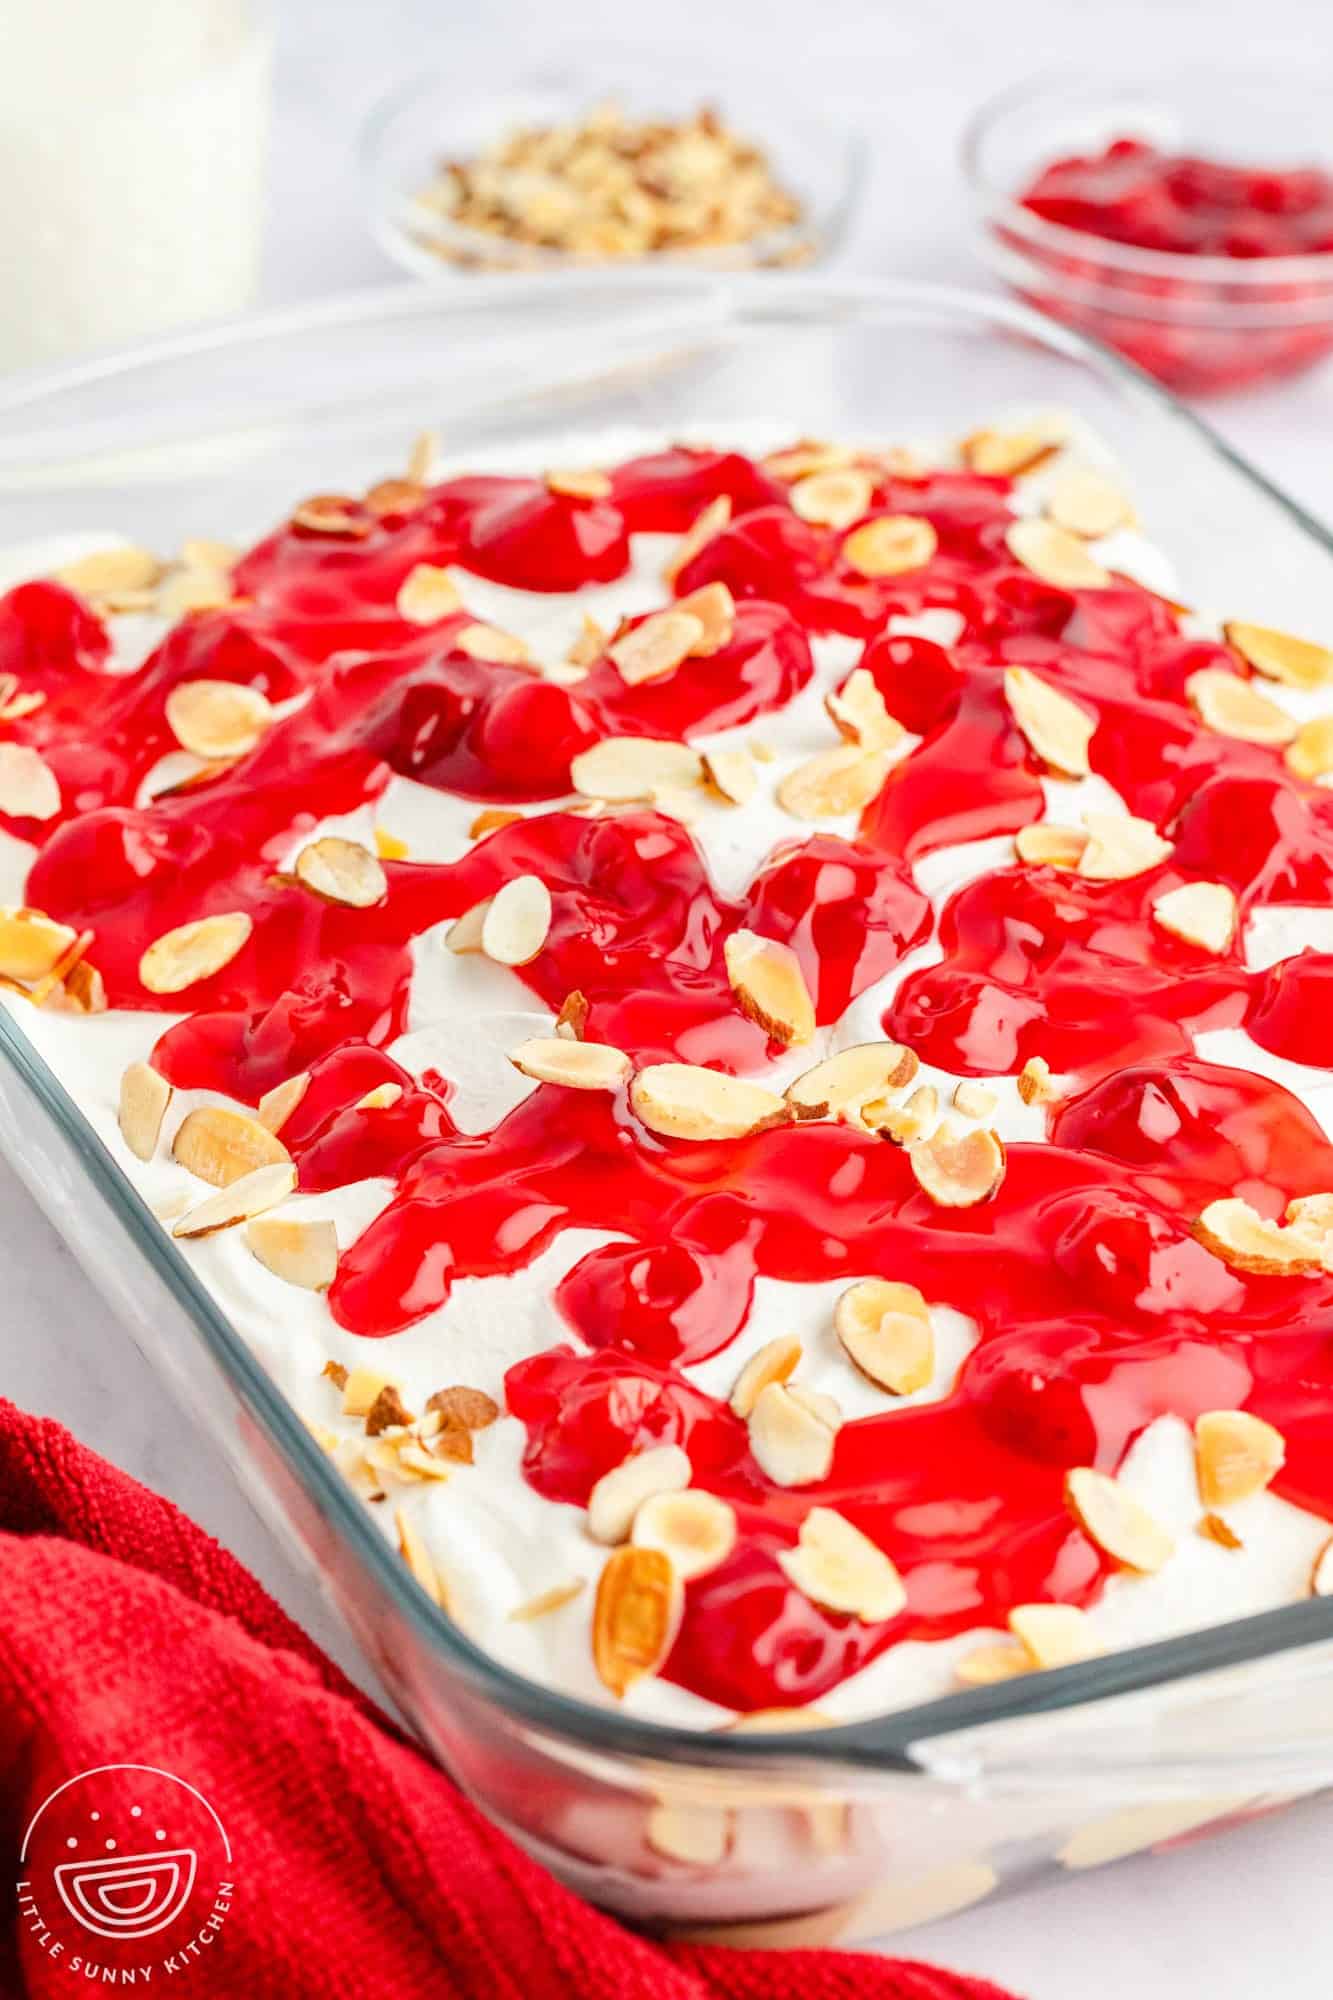 Heavenly cake in a glass pyrex pan, topped with cool whip, cherries, and almonds.